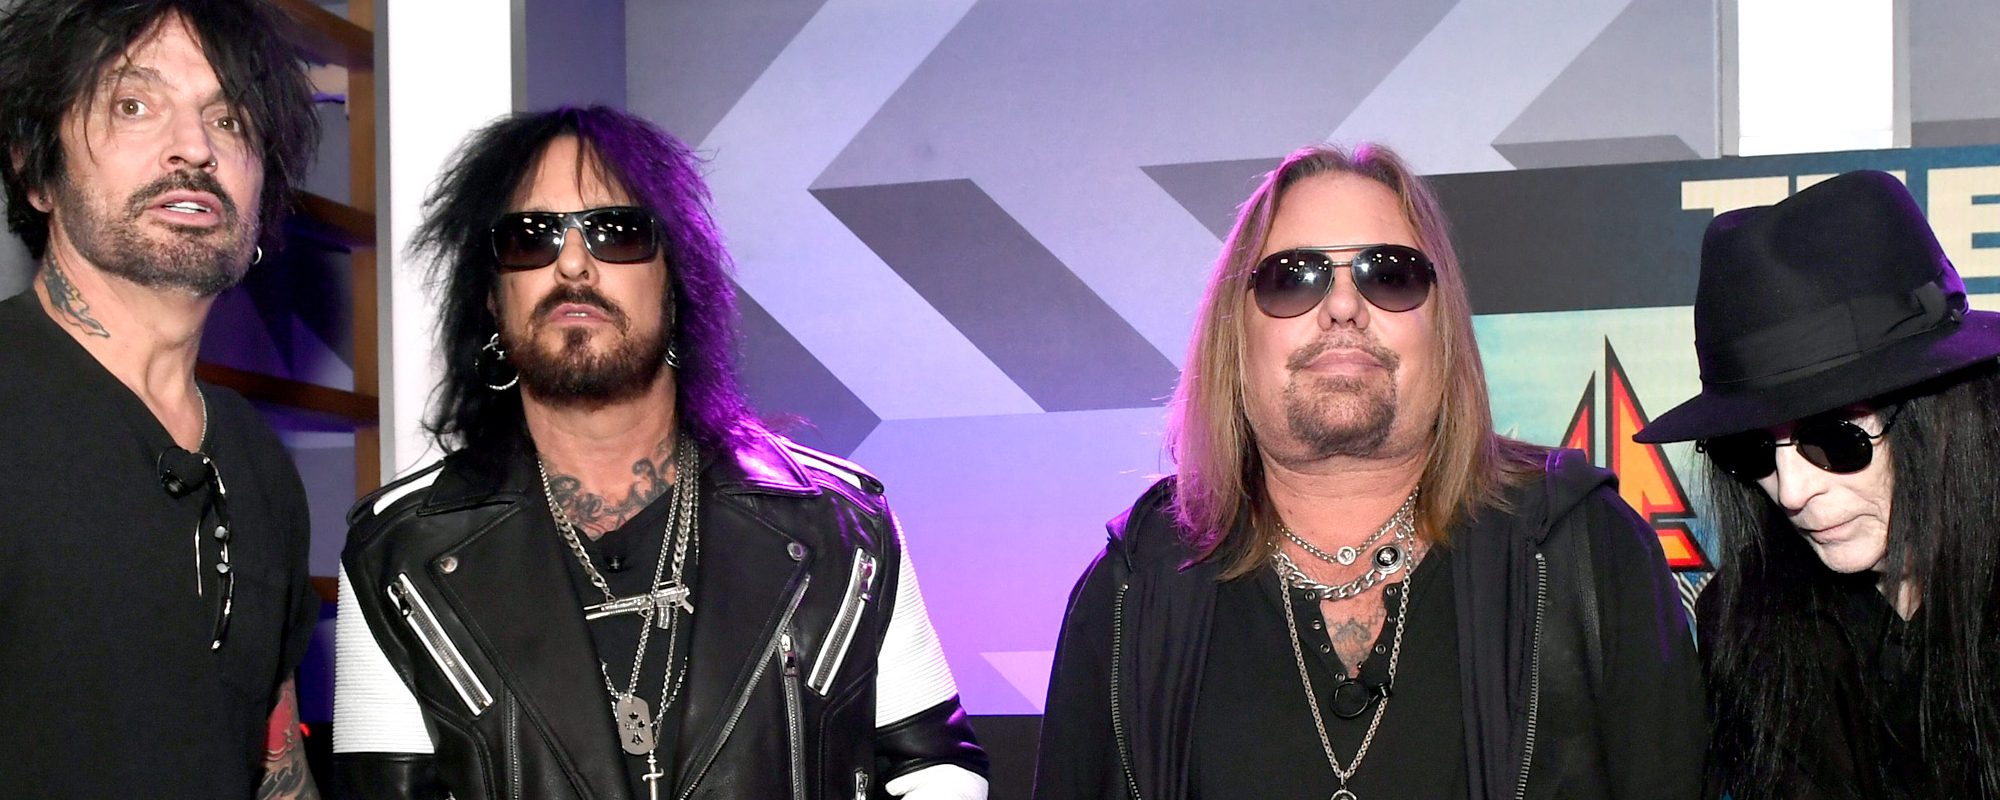 Vince Neil Claims Mötley Crüe Will Be “Dead” Before Rock and Roll Hall of Fame “Inducts Us”